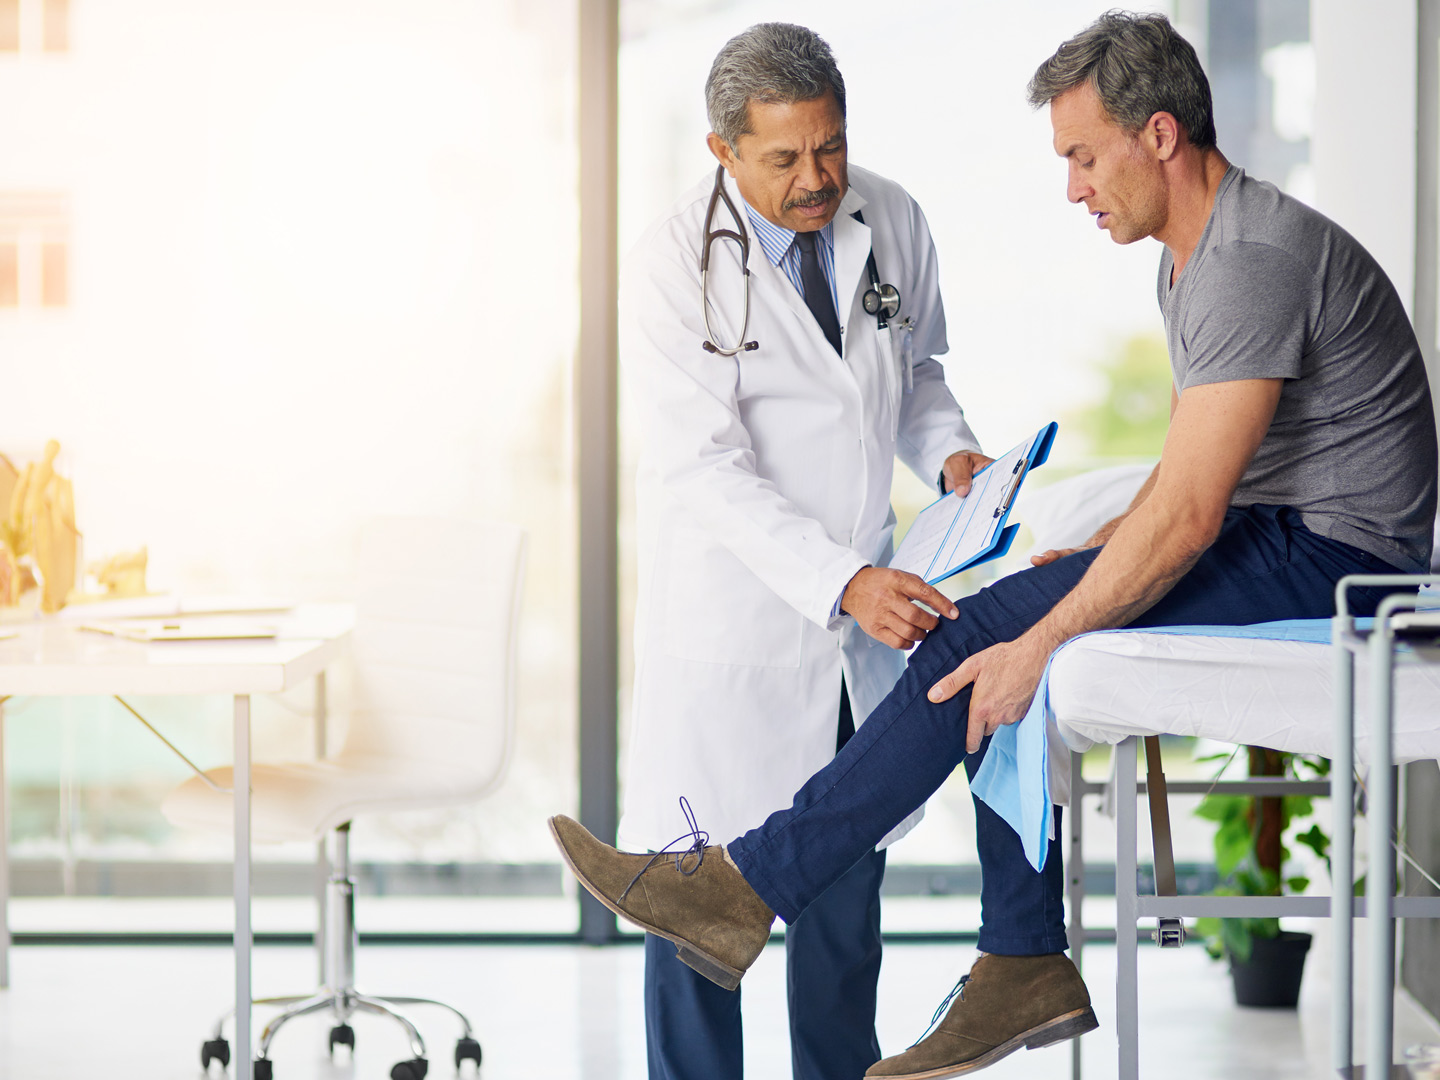 Why Should Patients with Muscle and Joint Pain See an Orthopedic Doctor?